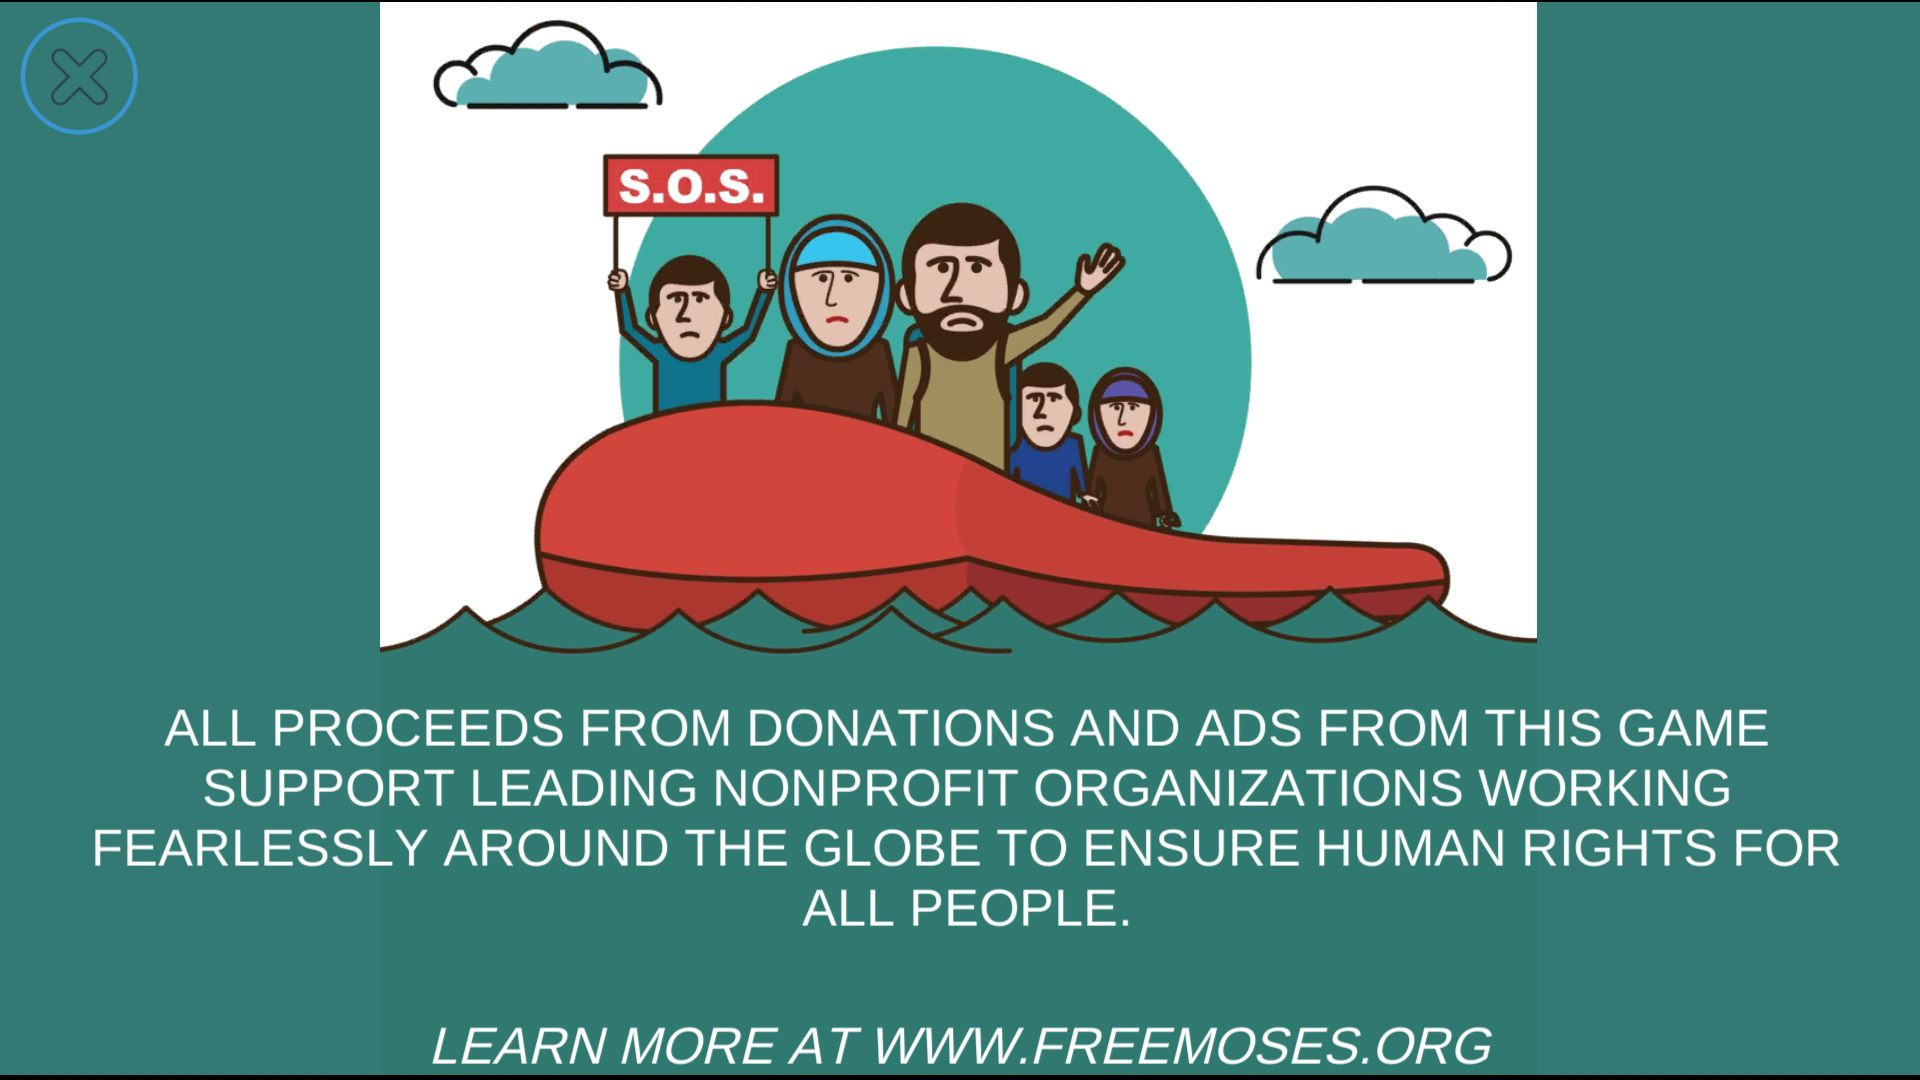 “Moses the Freedom Fighter” marks the first time a for-profit company has released a free mobile game with 100% of the donations in perpetuity going to a third-party charity (Oxfam America).